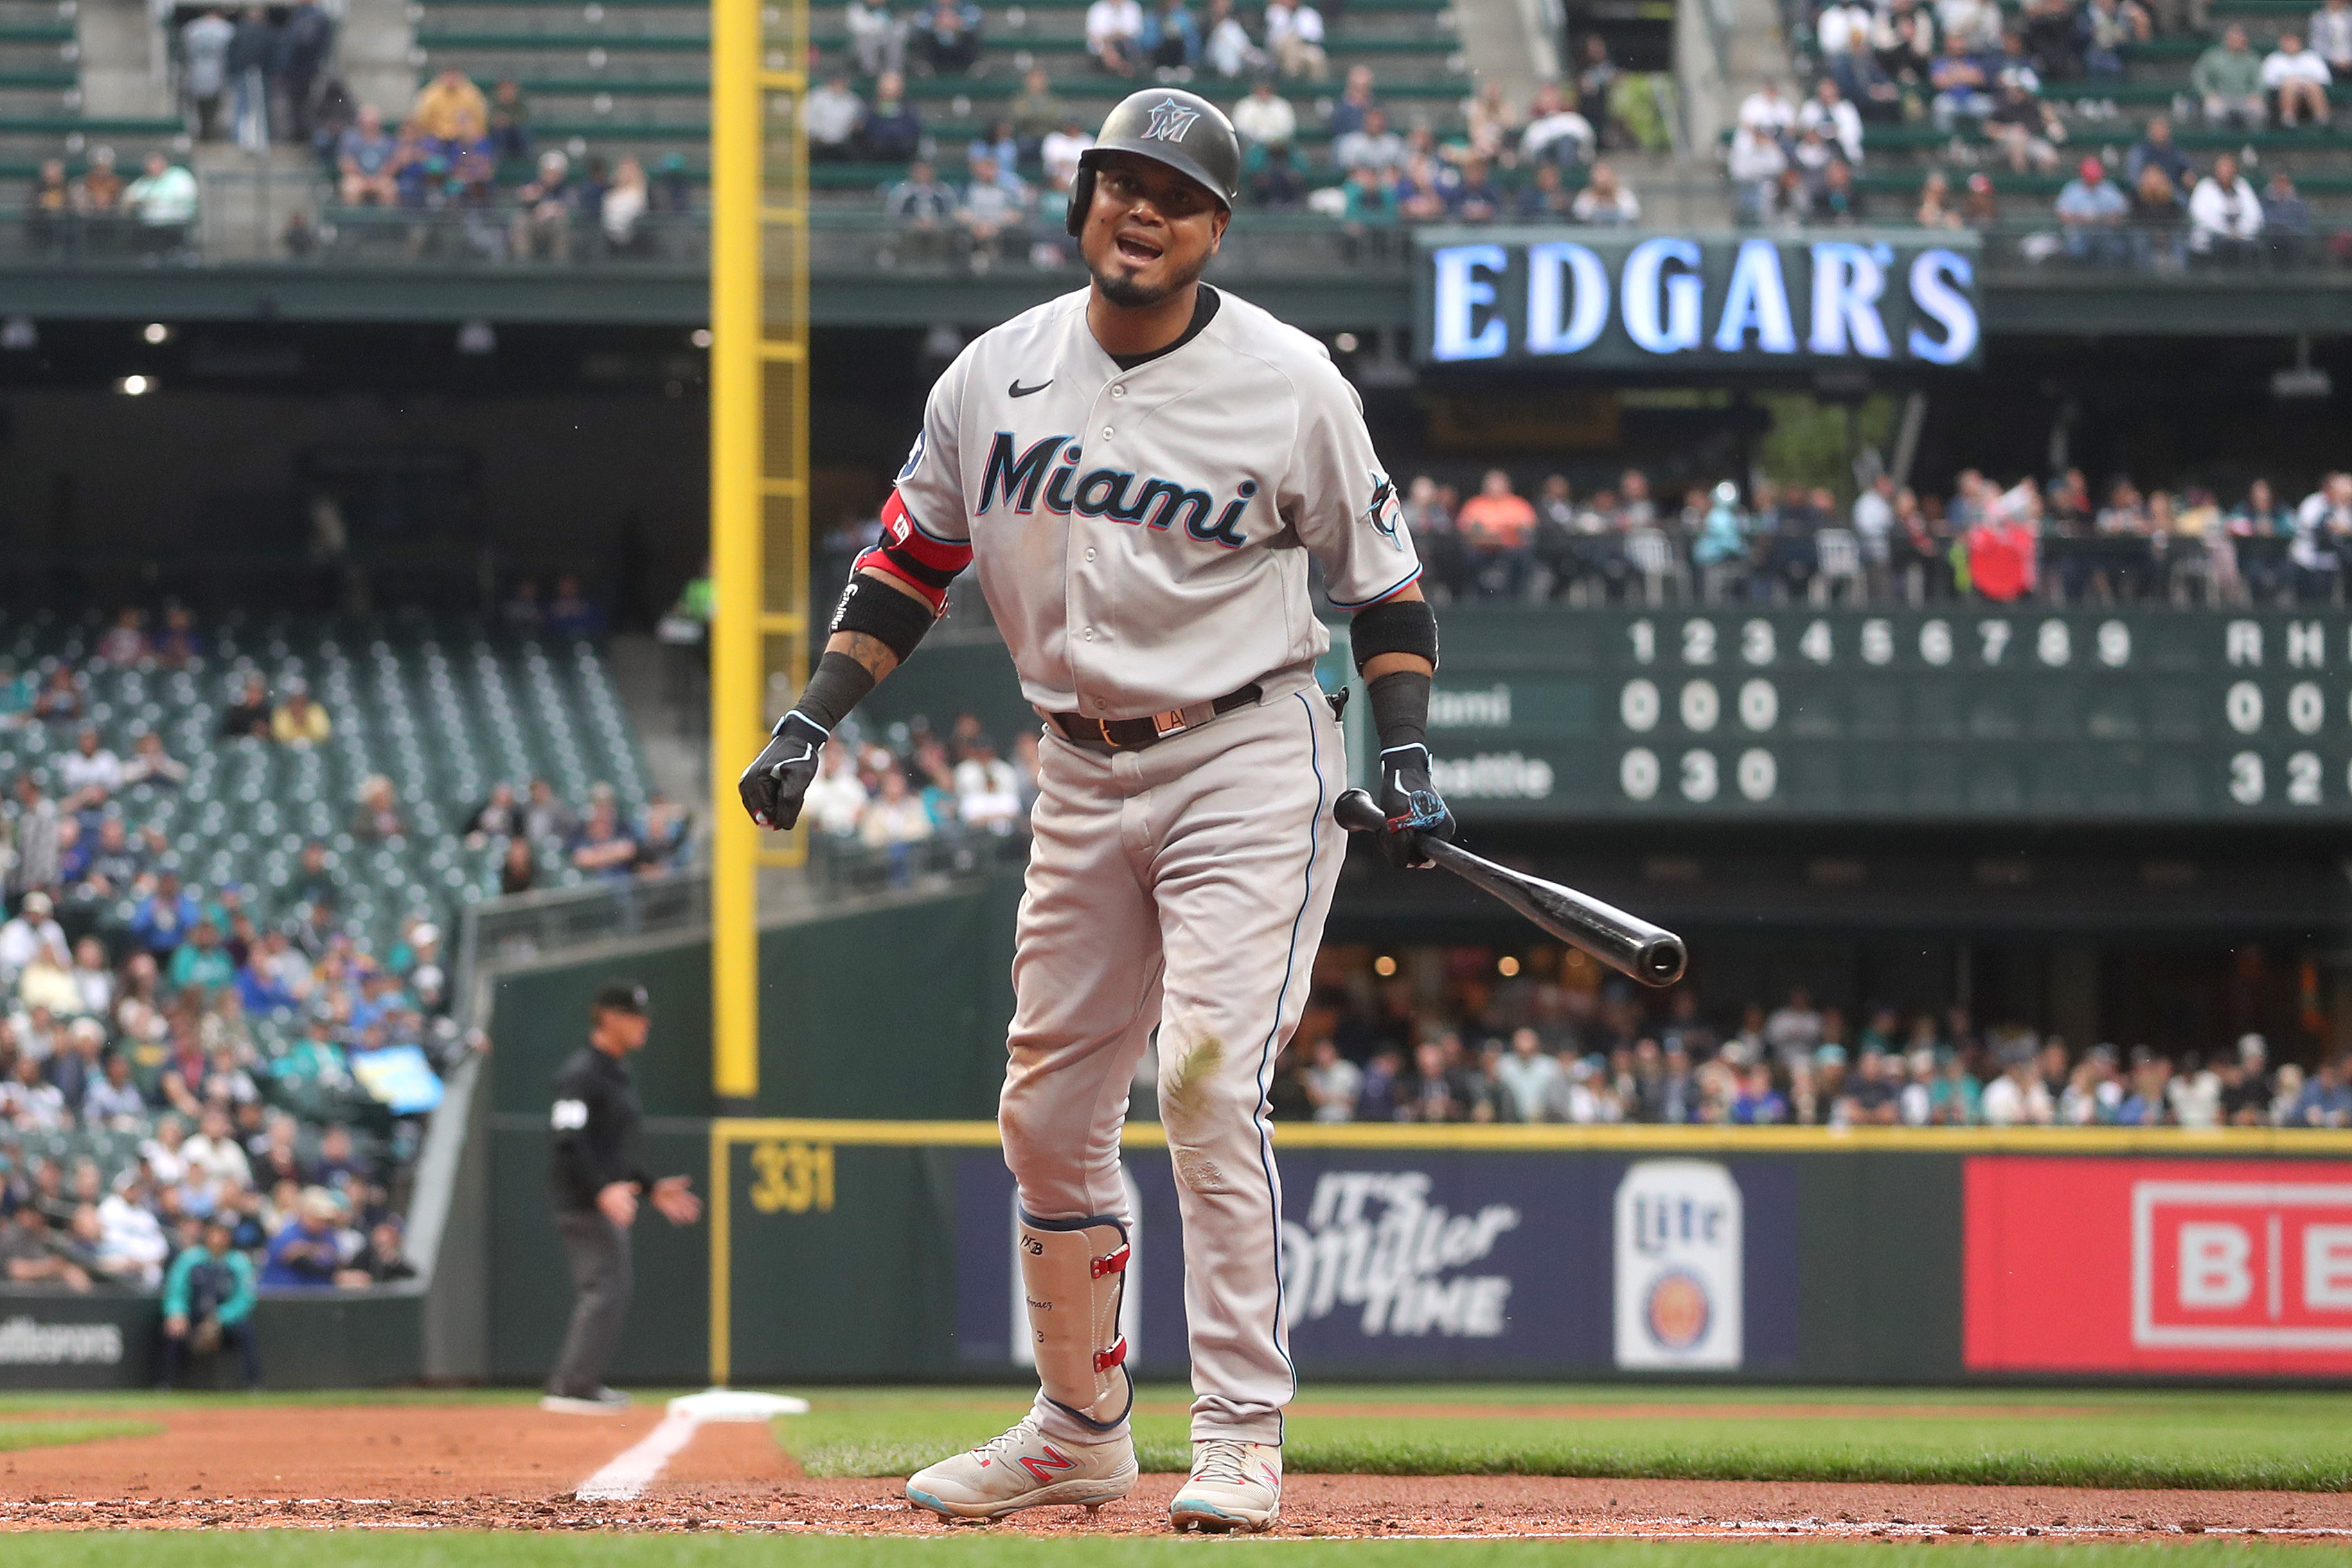 Miami Marlins v Seattle Mariners